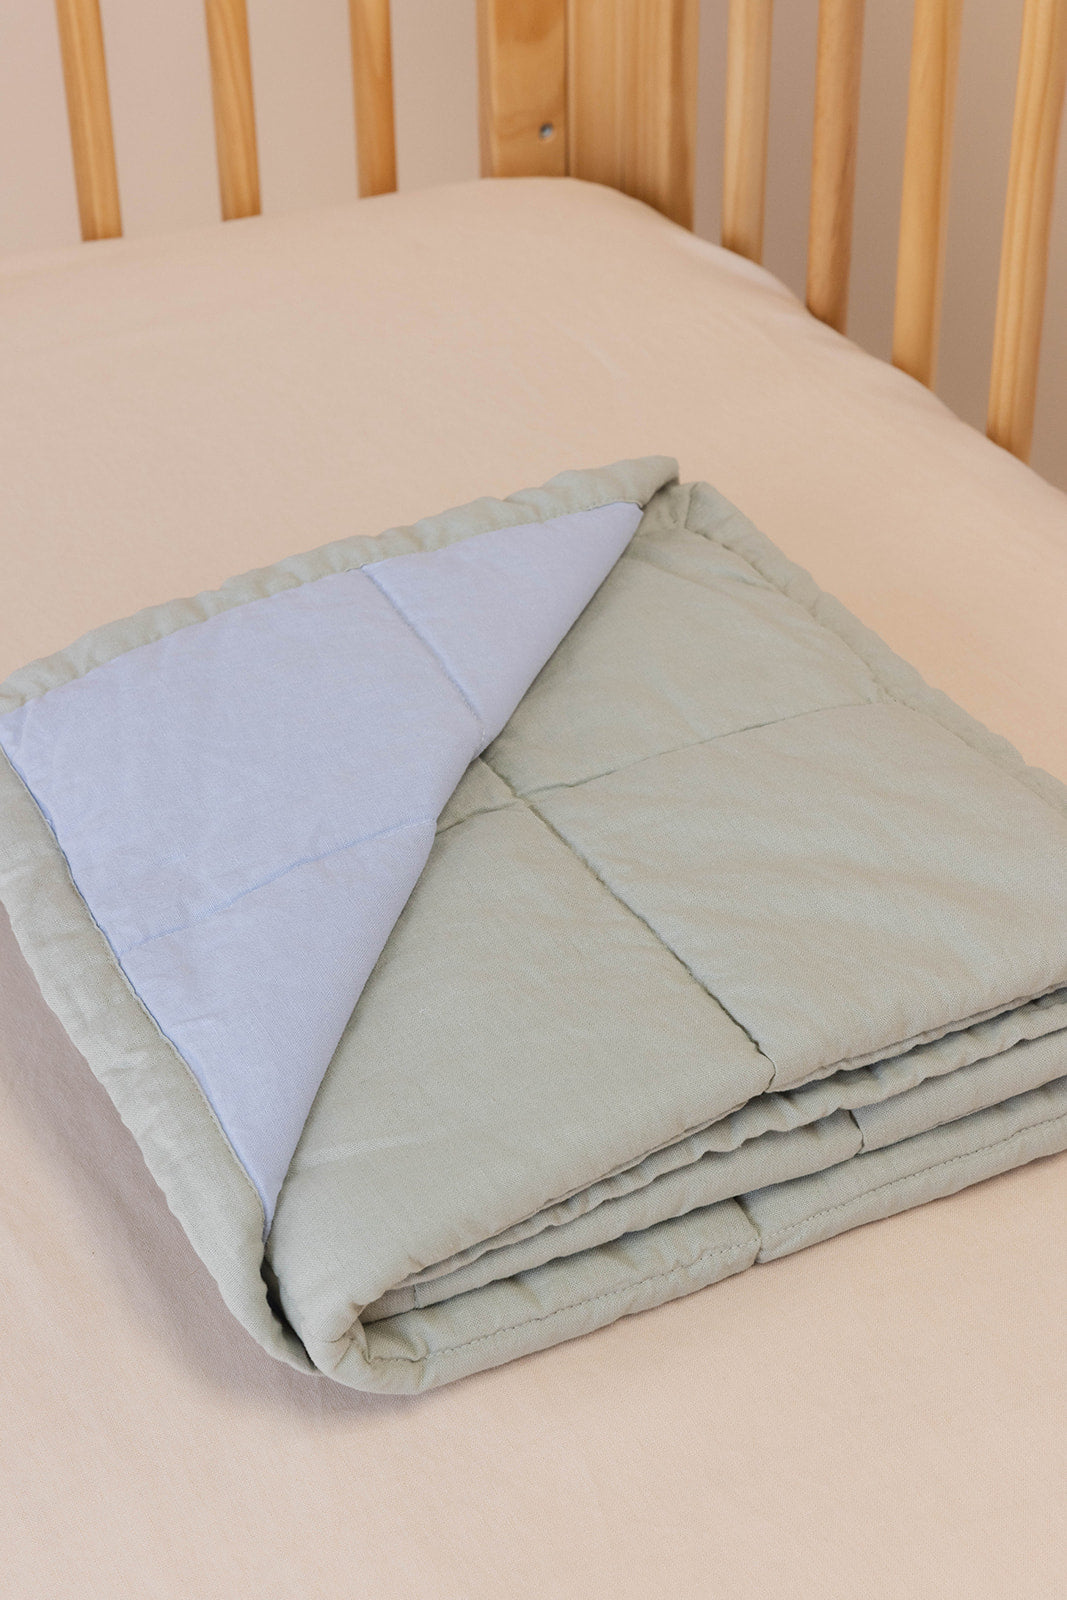 Turaco/Seagull - Linen Quilted Blanket